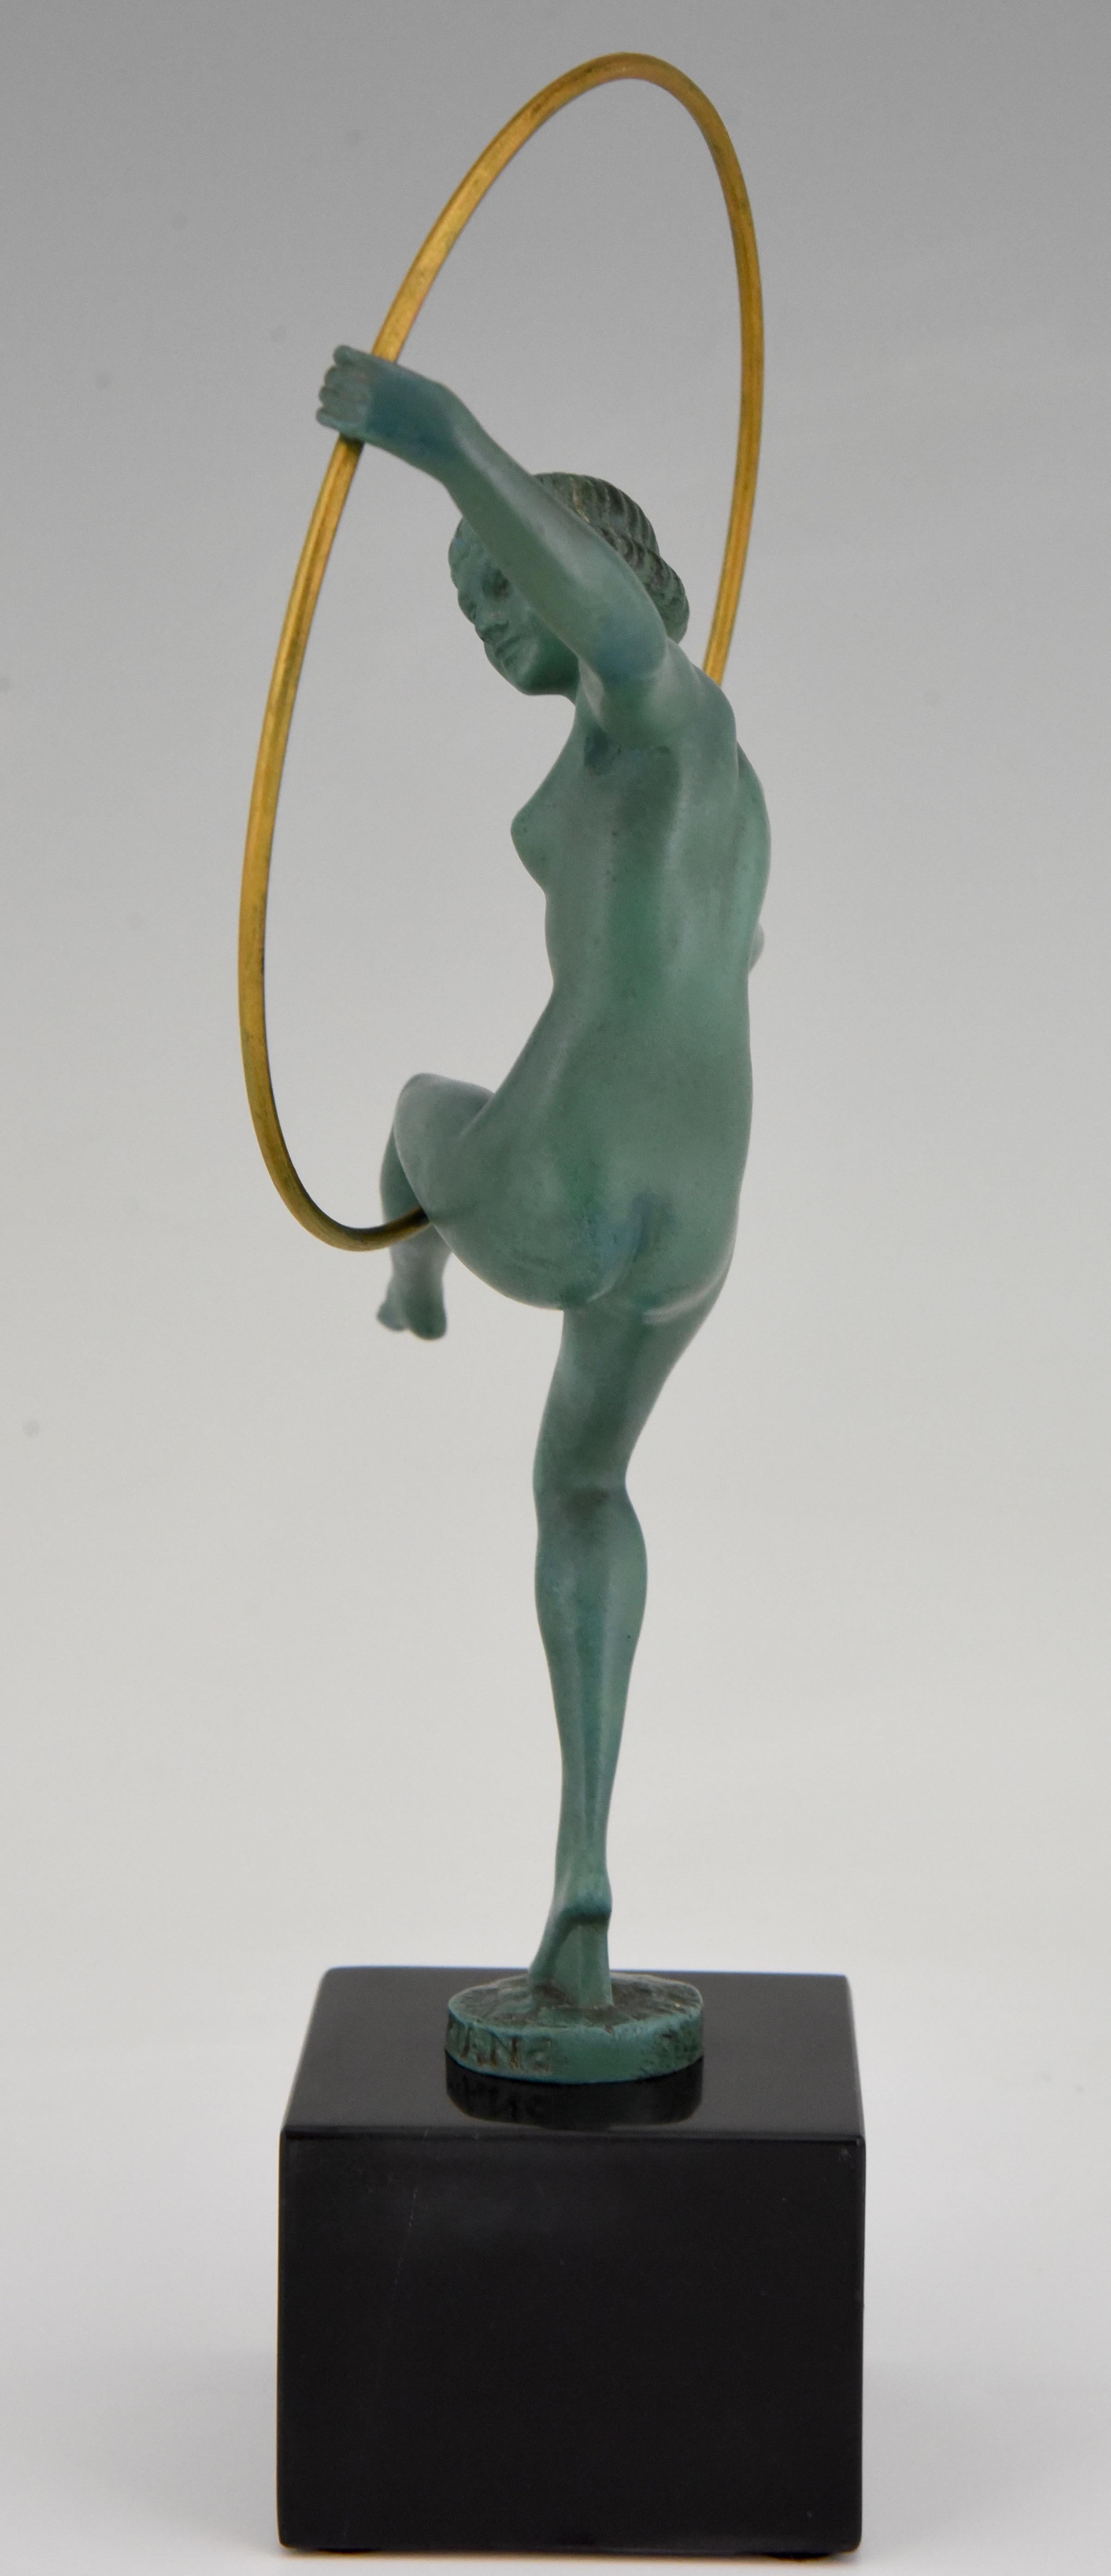 Patinated Art Deco Sculpture Hoop Dancer Briand, Marcel Andre Bouraine France, 1930